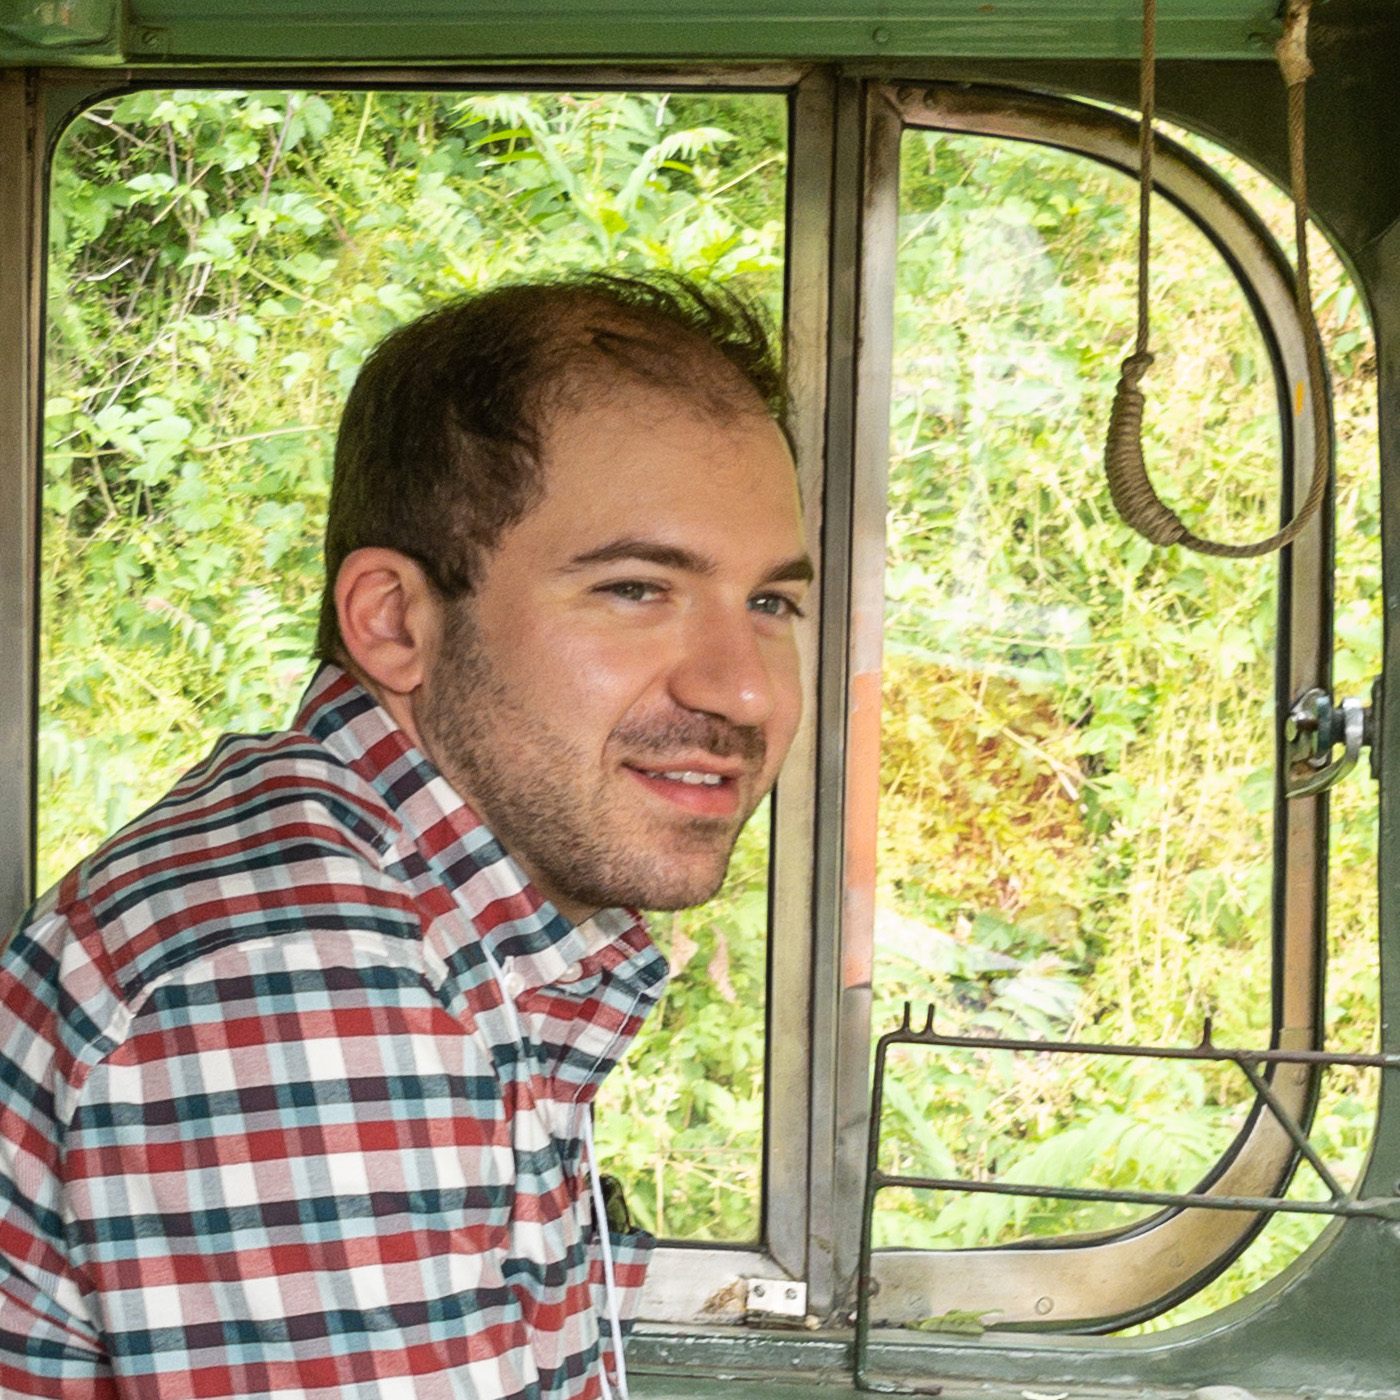 Photo of Doug, a white man in his 30s with short brown hair and brown stubble, in the operator's seat of a vintage PCC streetcar